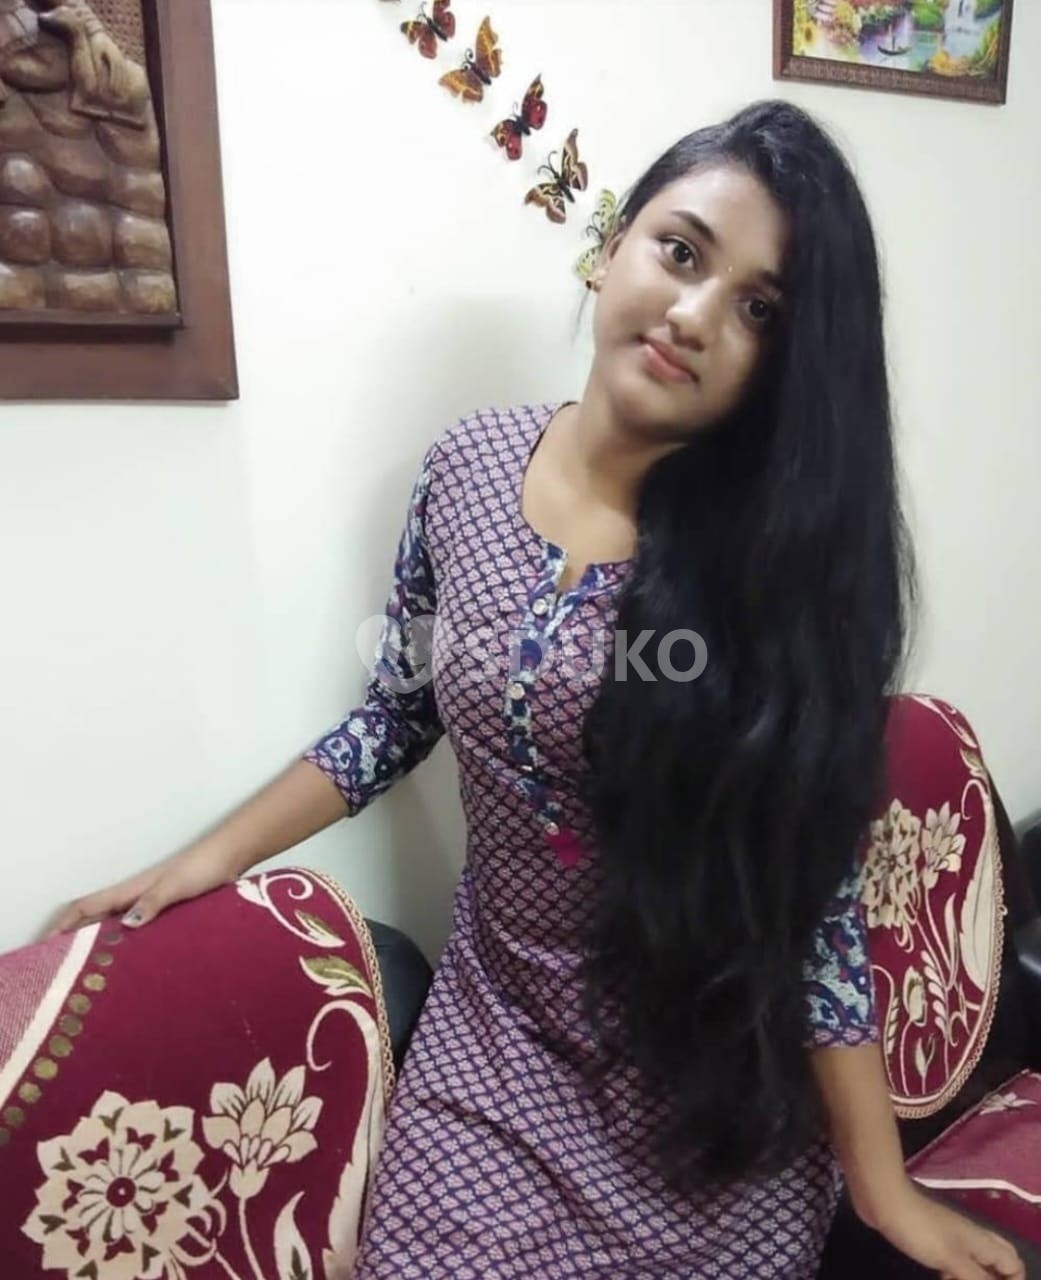 Mangalore 💙🔥MY SELF: DIVYA UNLIMITED SEX CUTE BEST SERVICE AND 24 HR AVAILABLE....,,.